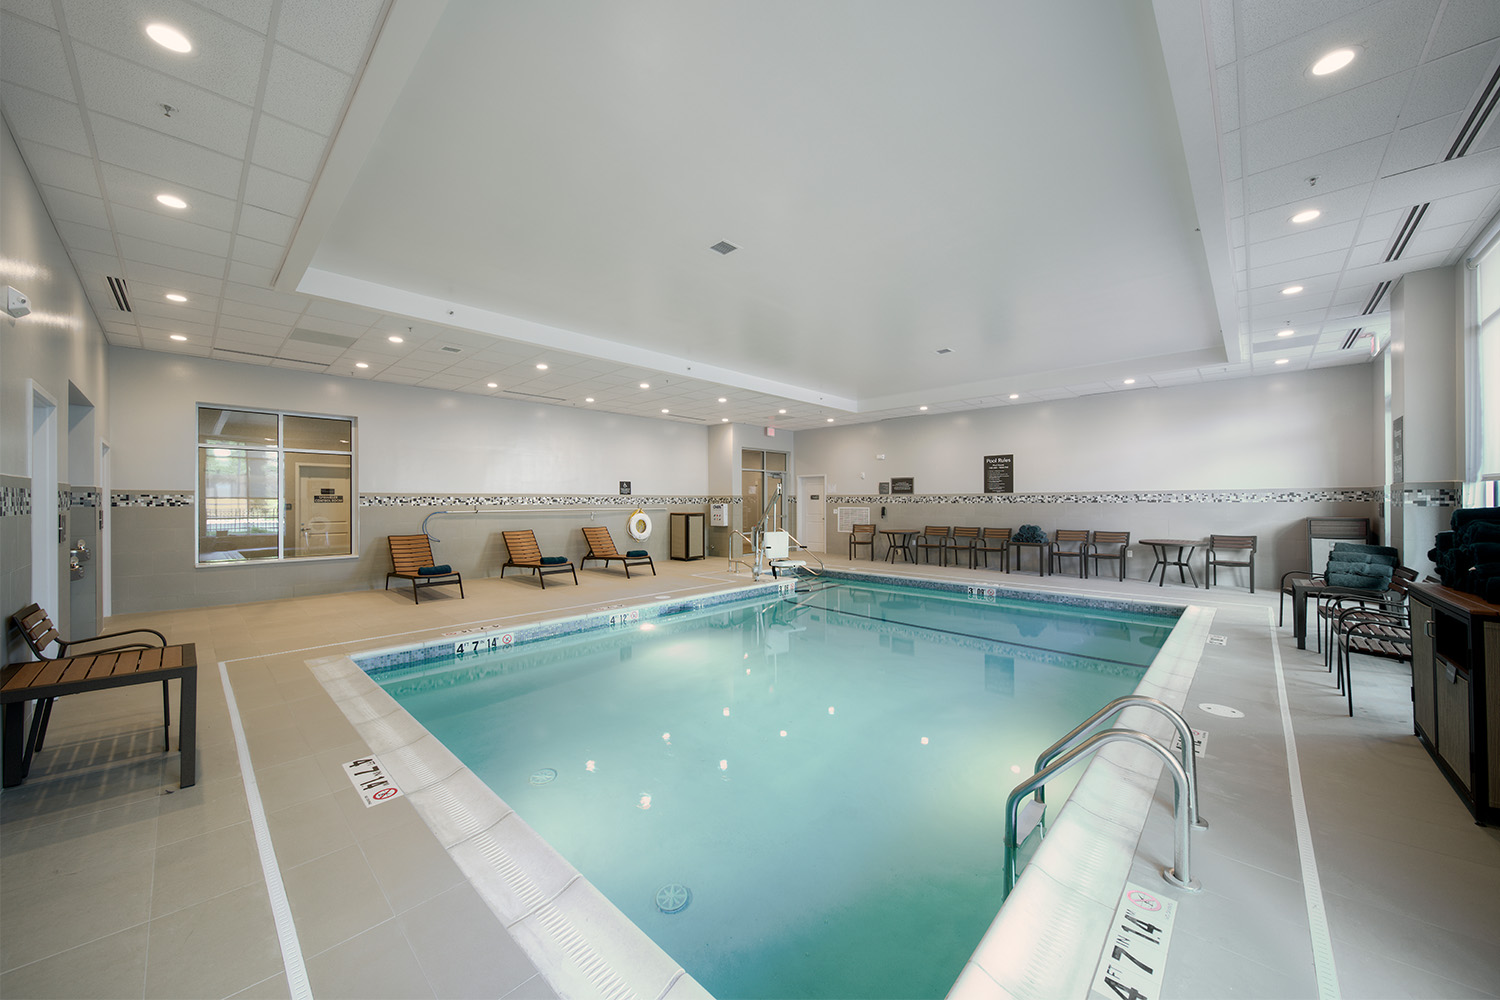 Indoor pool area with lounge chairs 